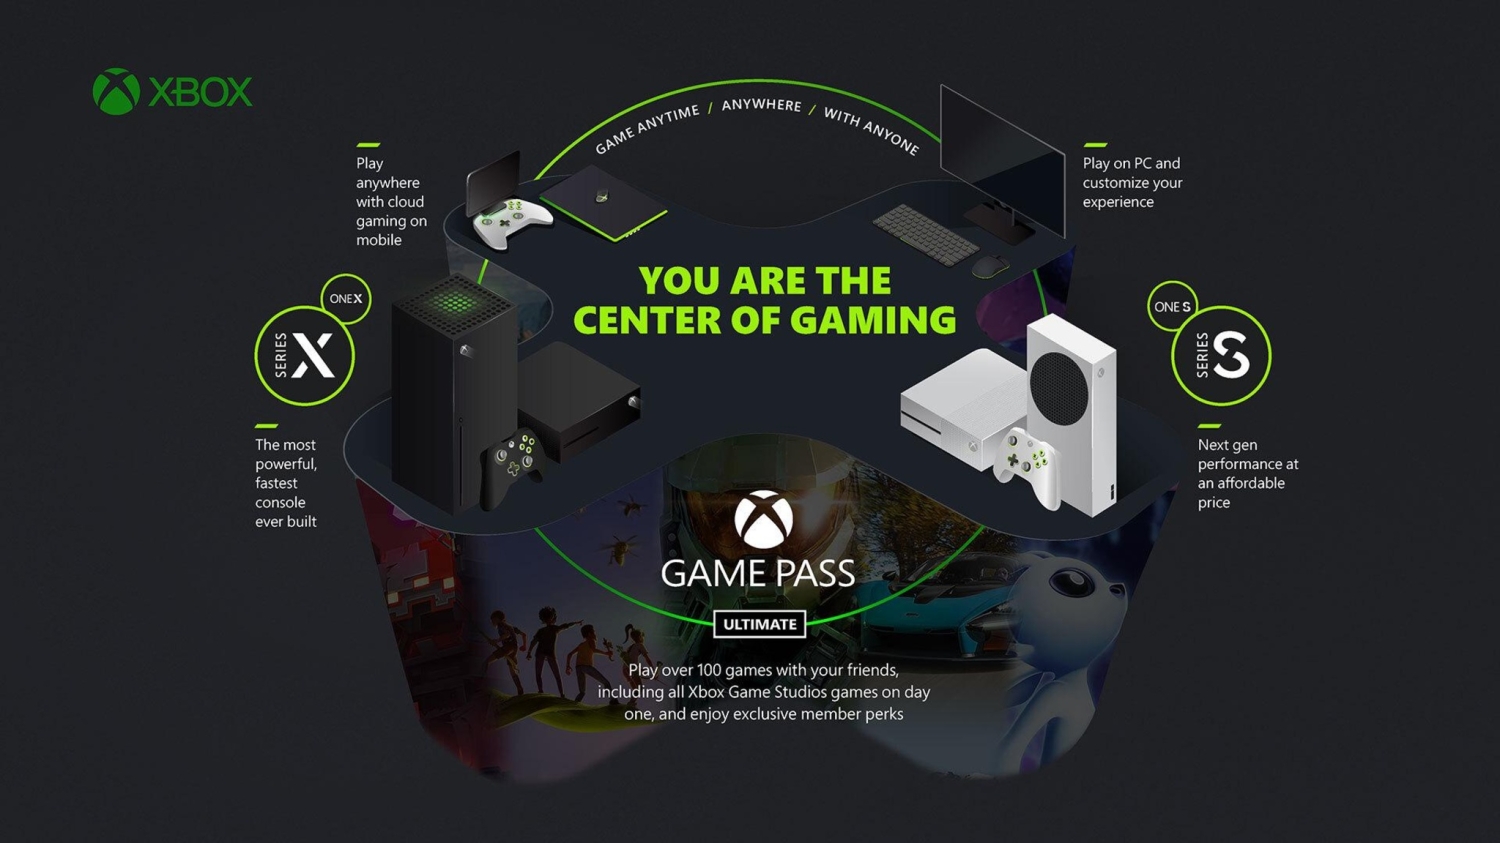 Xbox Game Pass Core Price, Tiers, and How to Change Your Subscription